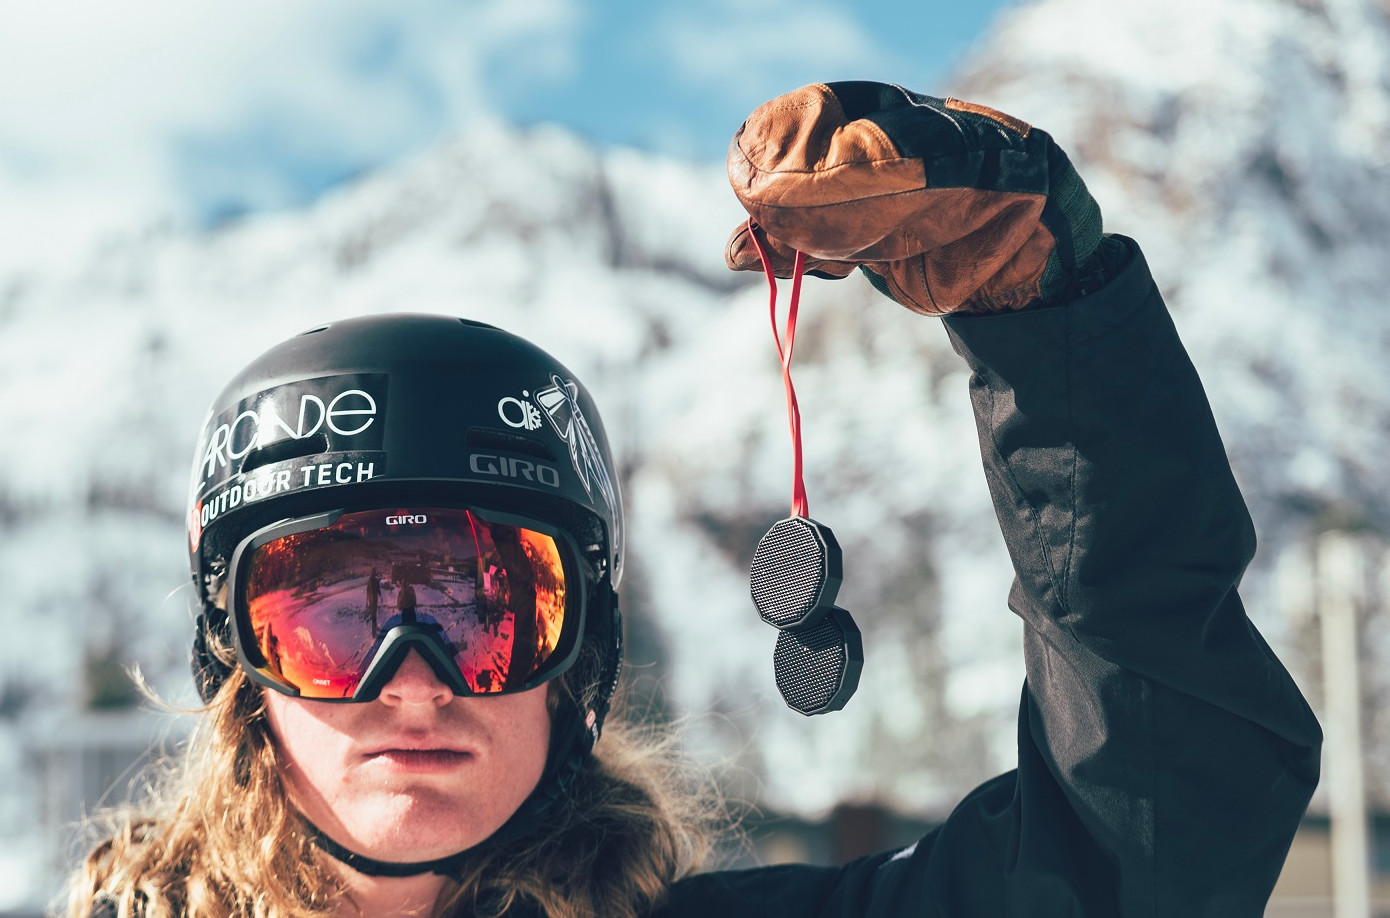 Outdoor Tech's Chips ski helmet speakers are a hot mess of